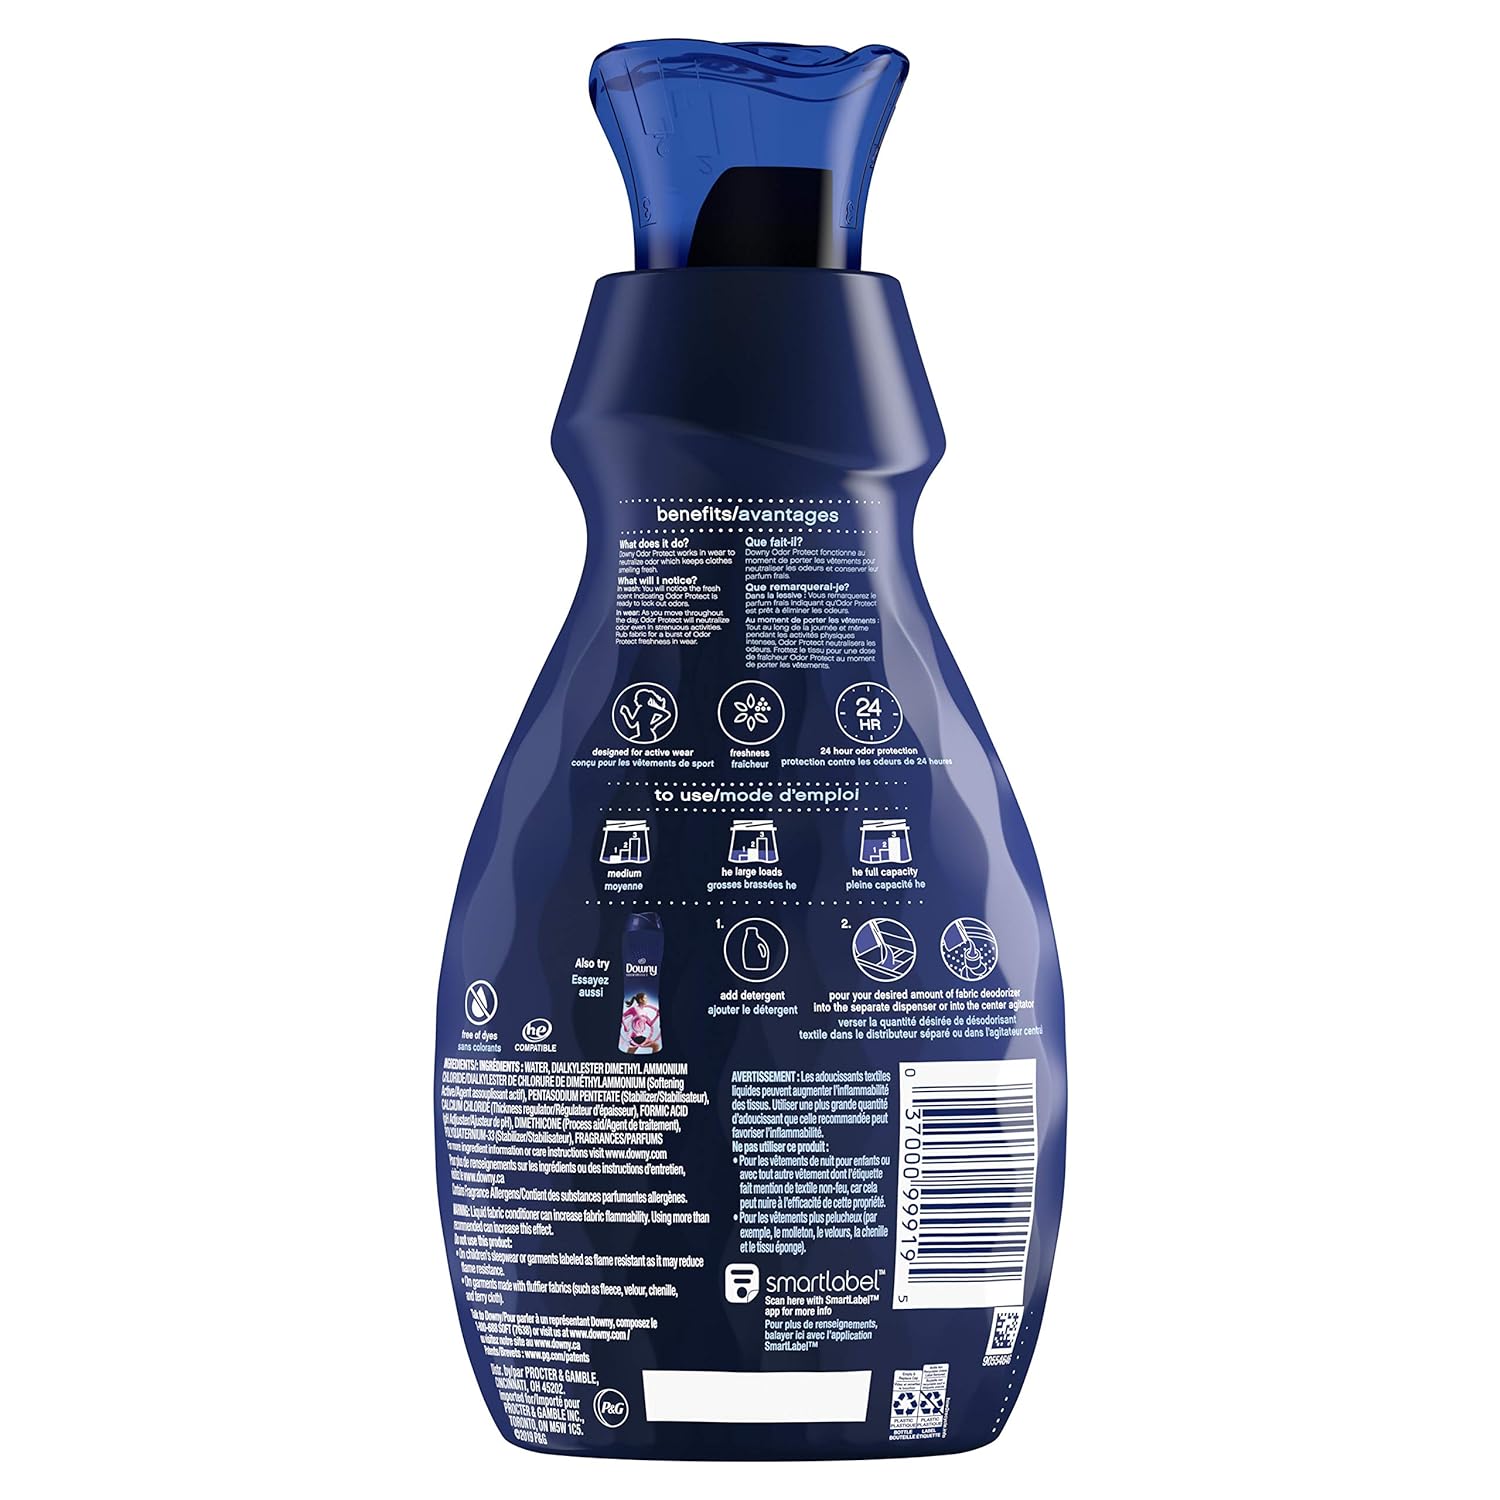 Downy Odor Protect Fabric Deodorizer and Fabric Conditioner, April Fresh, 32 fl oz : Health & Household